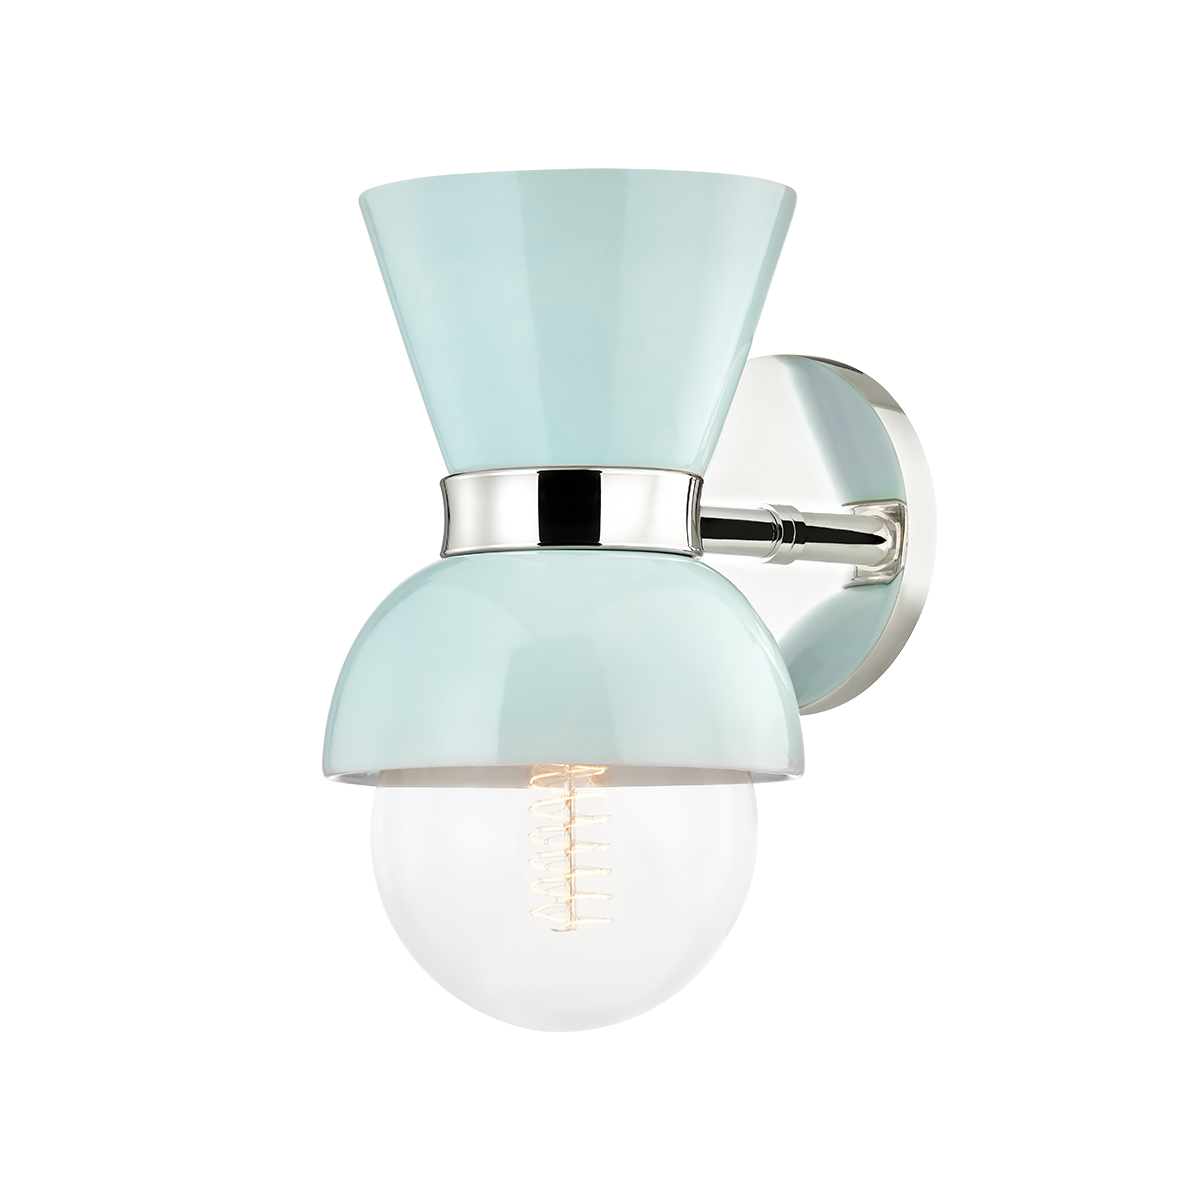 Gillian 1 Light Wall Sconce-Mitzi-HVL-H469101-PN/CRB-Outdoor Wall SconcesPolished Nickel / Ceramic Gloss Robins Egg Blue-2-France and Son